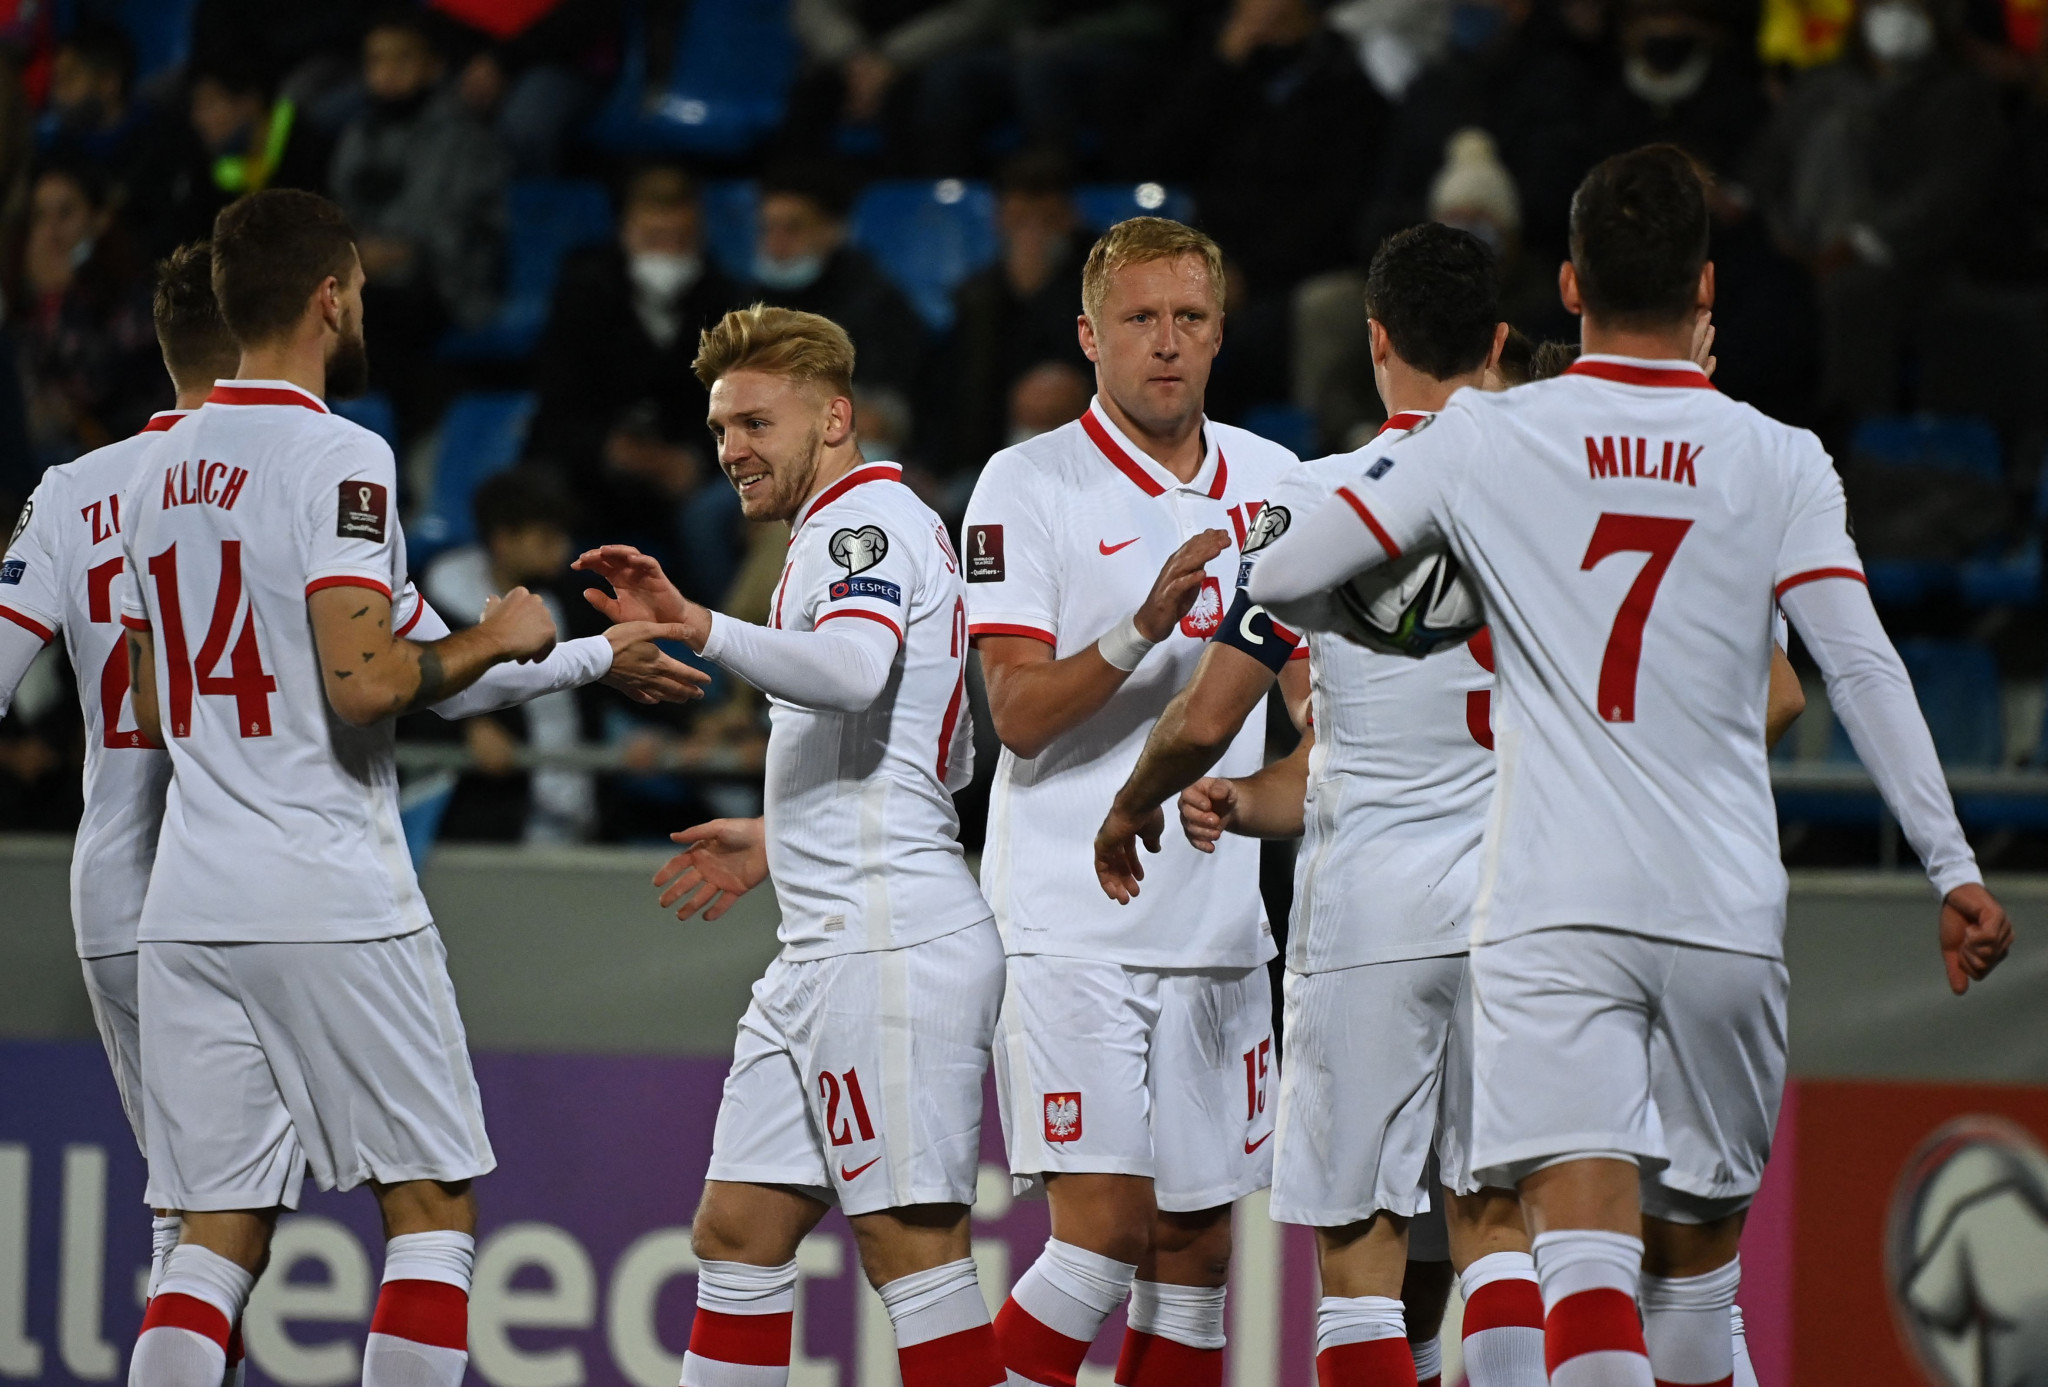 Poland are due to travel to Moscow for a crucial FIFA World Cup qualifier against Russia next month, and the Polish Football Association has called on FIFA to 